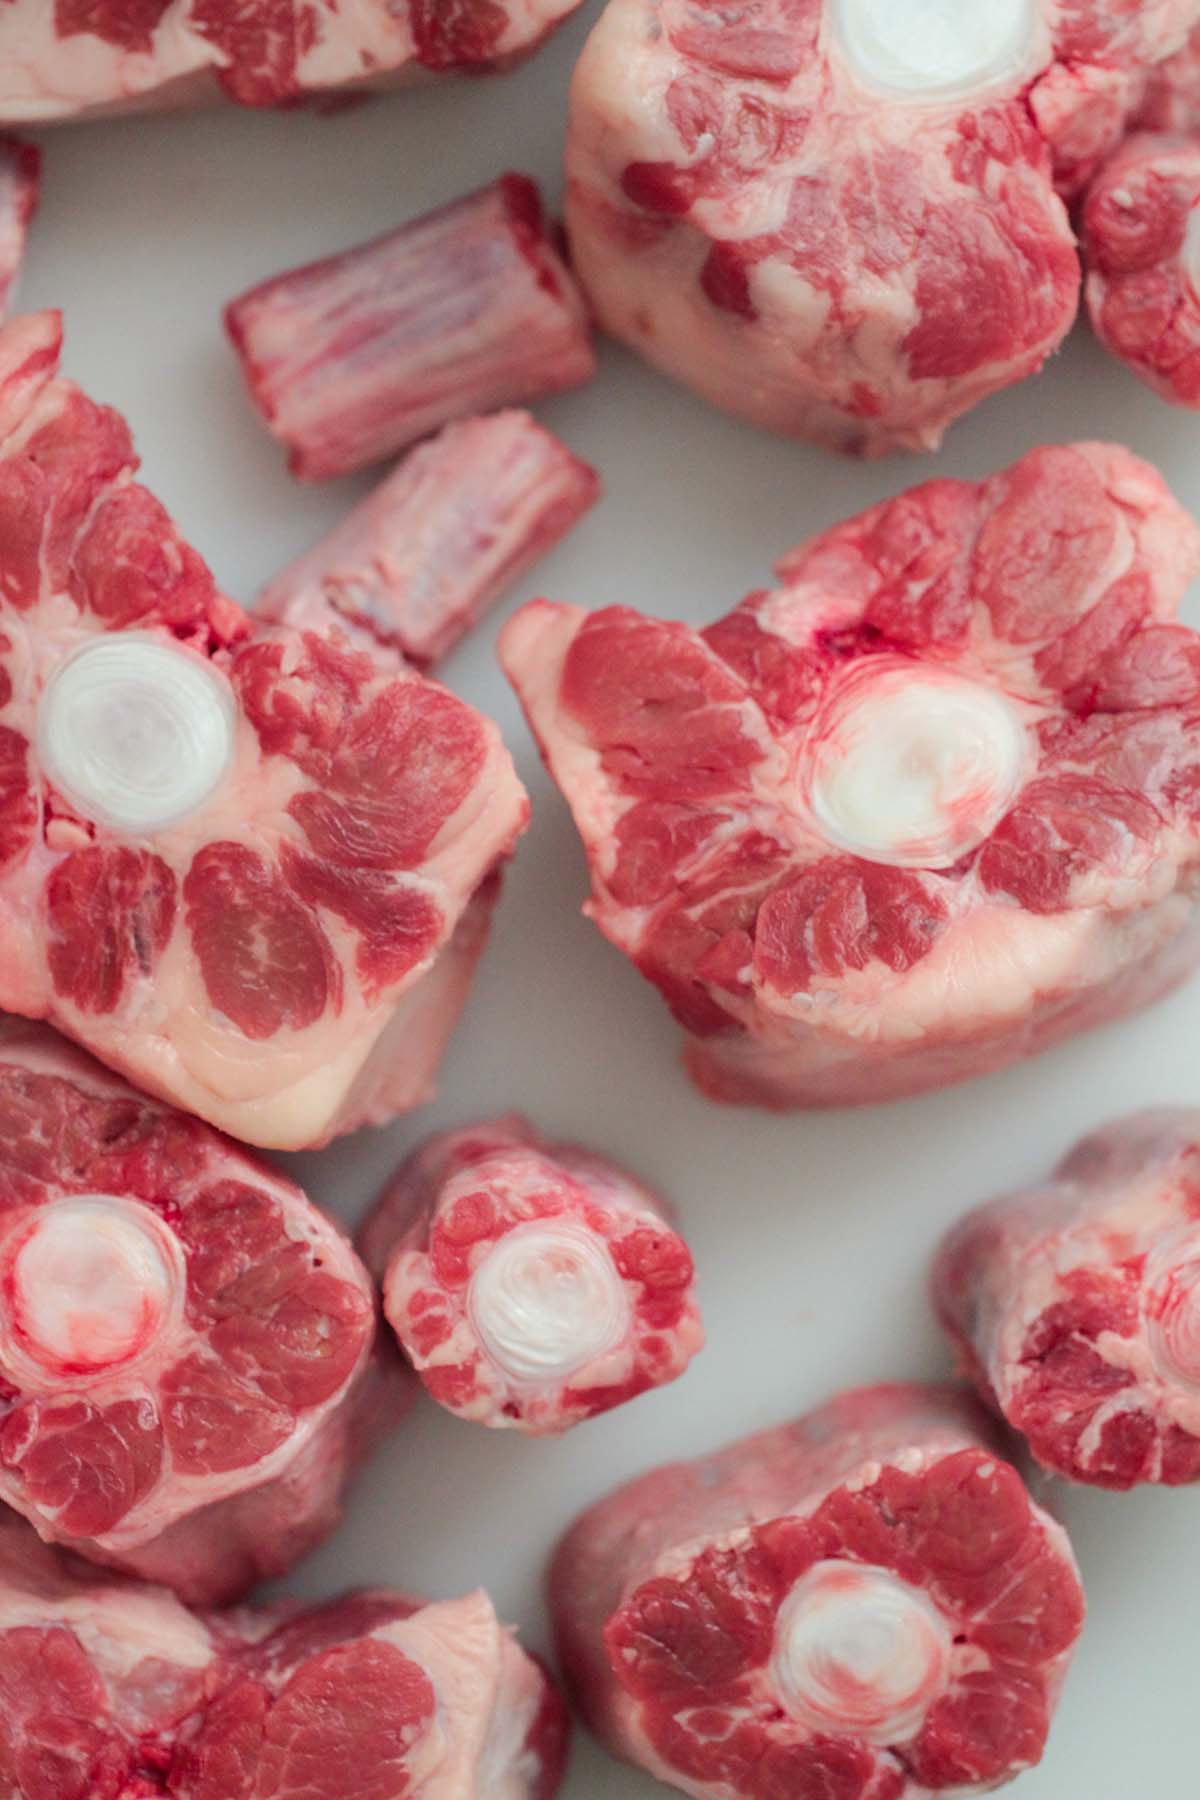 raw beef oxtails. 